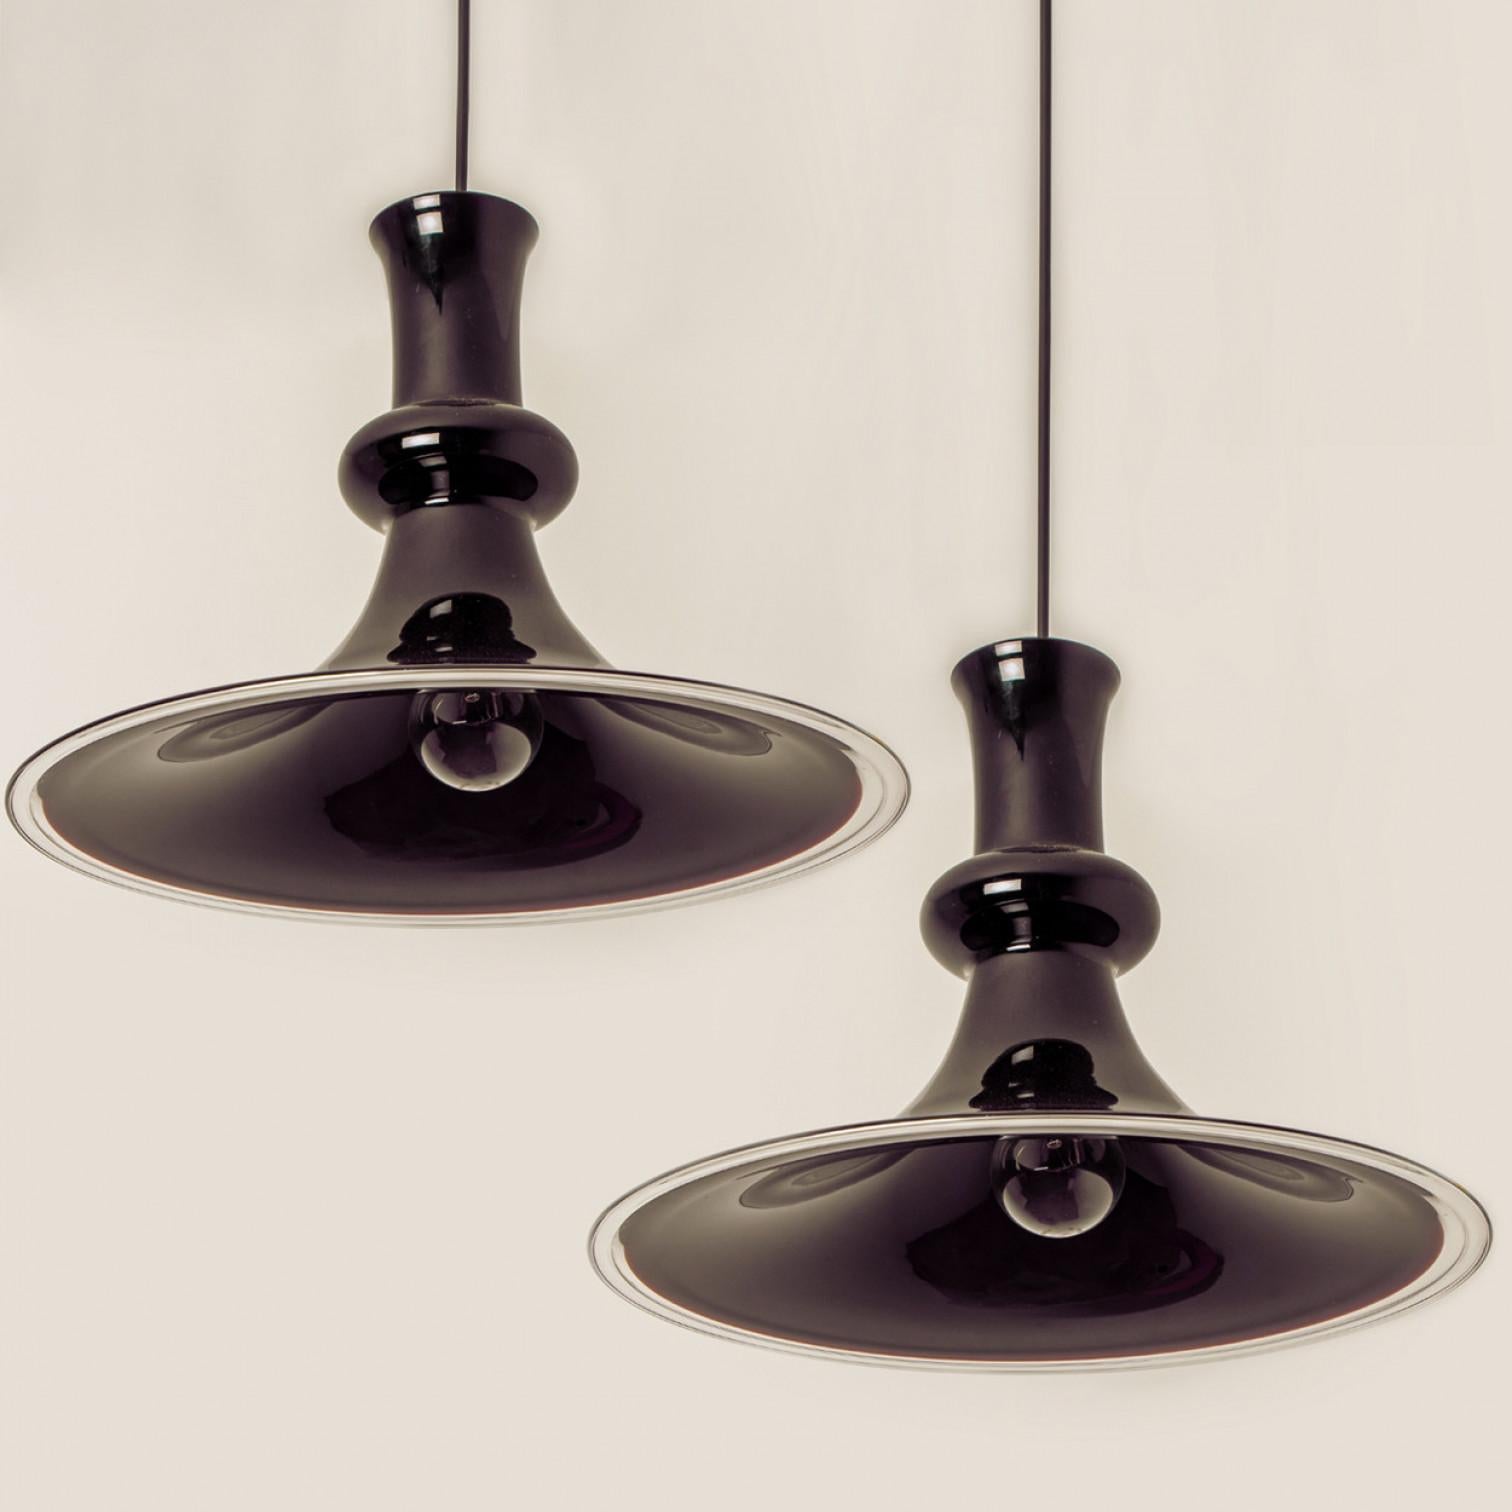 Pair of Aubergine Holmegaard Hanging Lamps model Etude by Michael Bang, 1970 For Sale 2